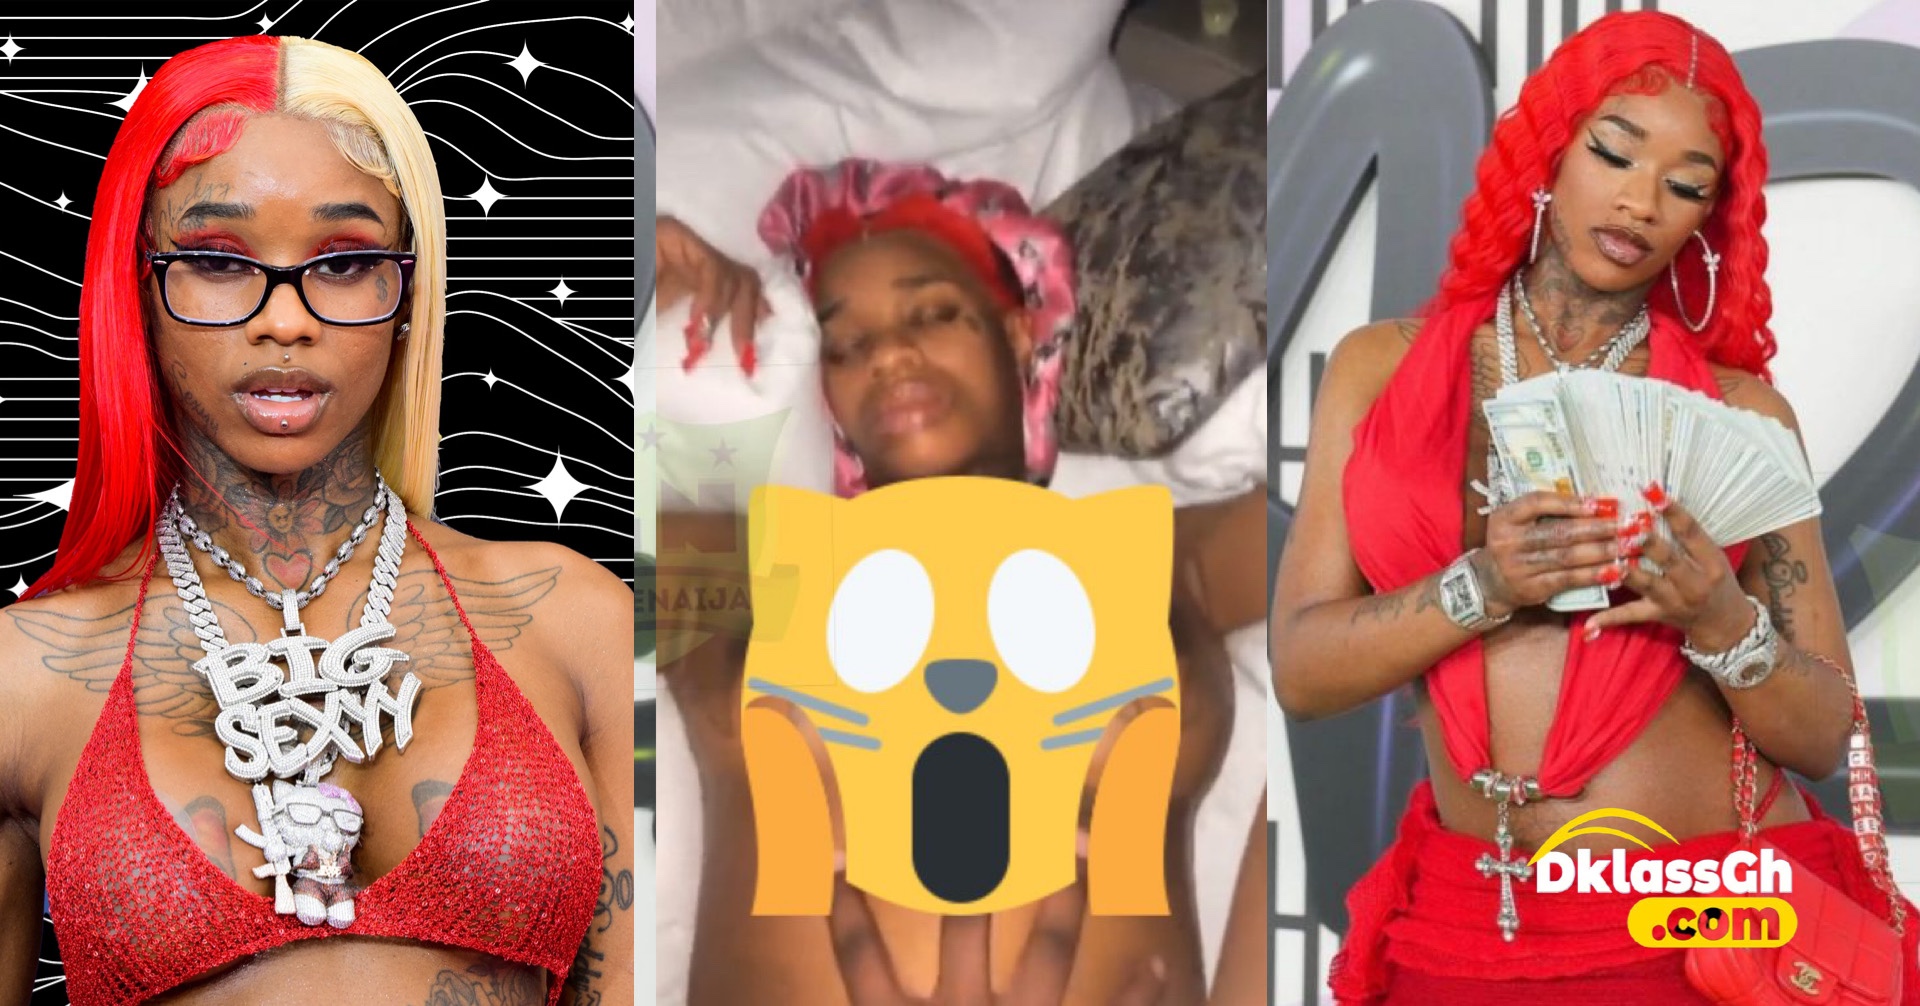 Sexyy Red Shocks Internet By Accidentally Leaking Her Own Sex Tape